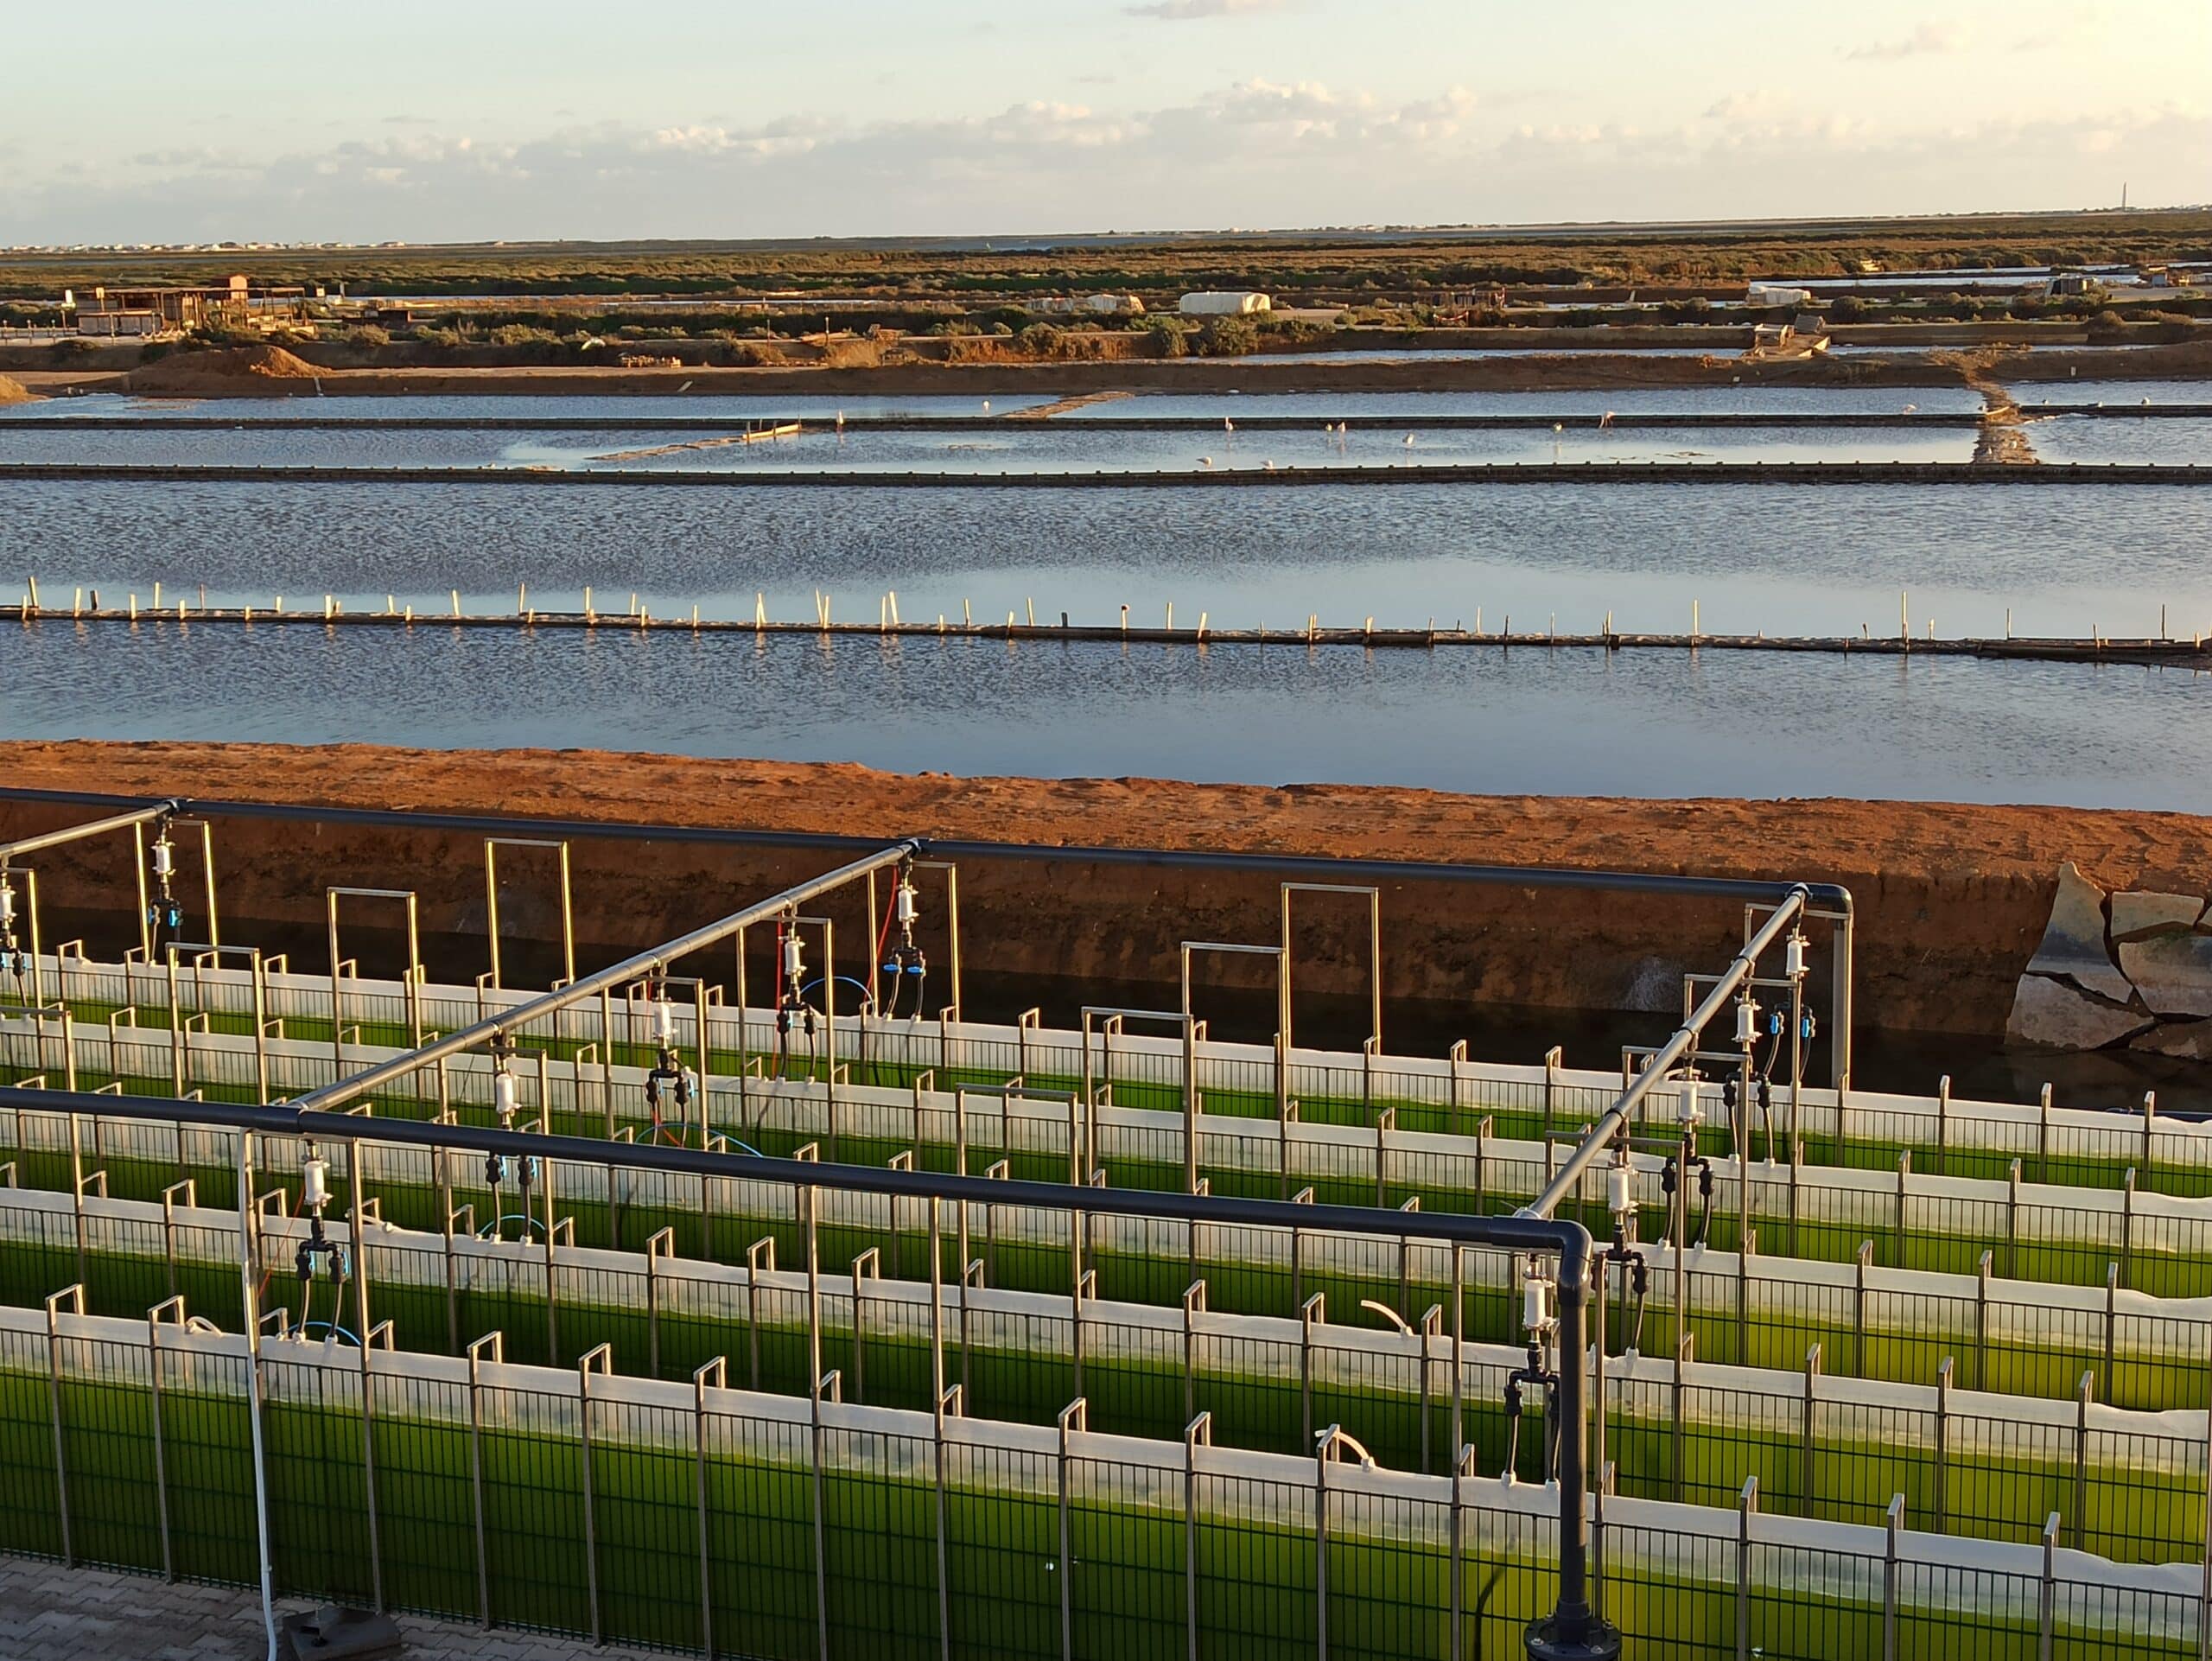 Tubular photo-bioreactor at Necton’s facilities. With new photo-bioreactors andadvanced monitoring of cultures, microalgae can be cultivated under controlled
conditions. Credit: Necton